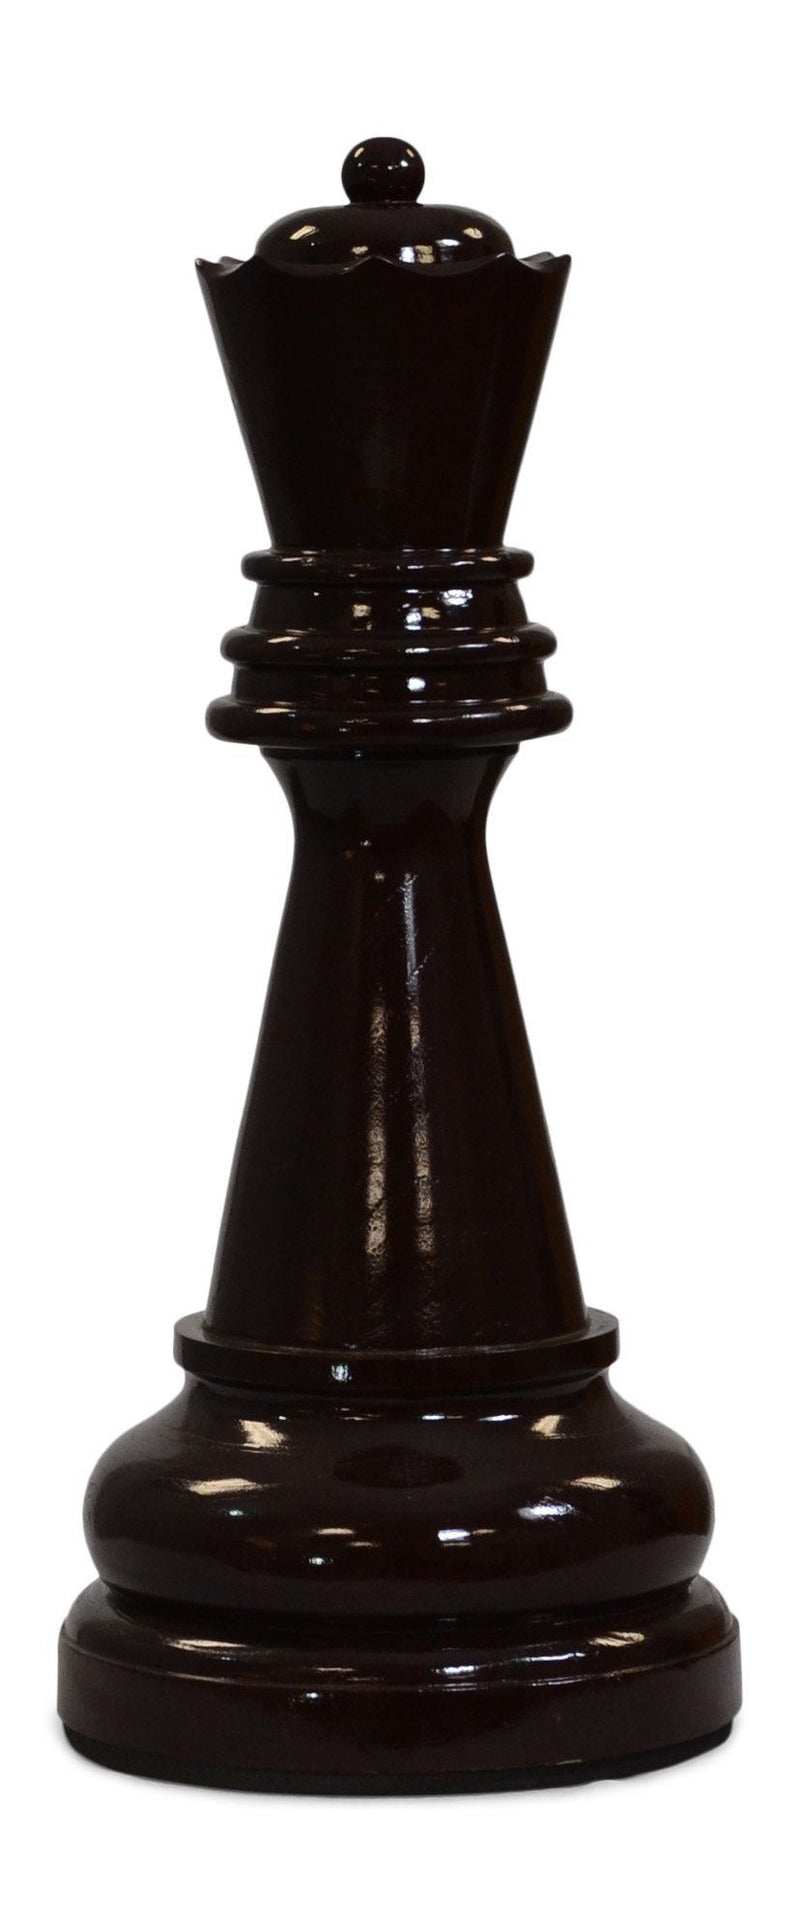 Black Queen Most Powerful Chess Piece African American Canvas - TeeHex